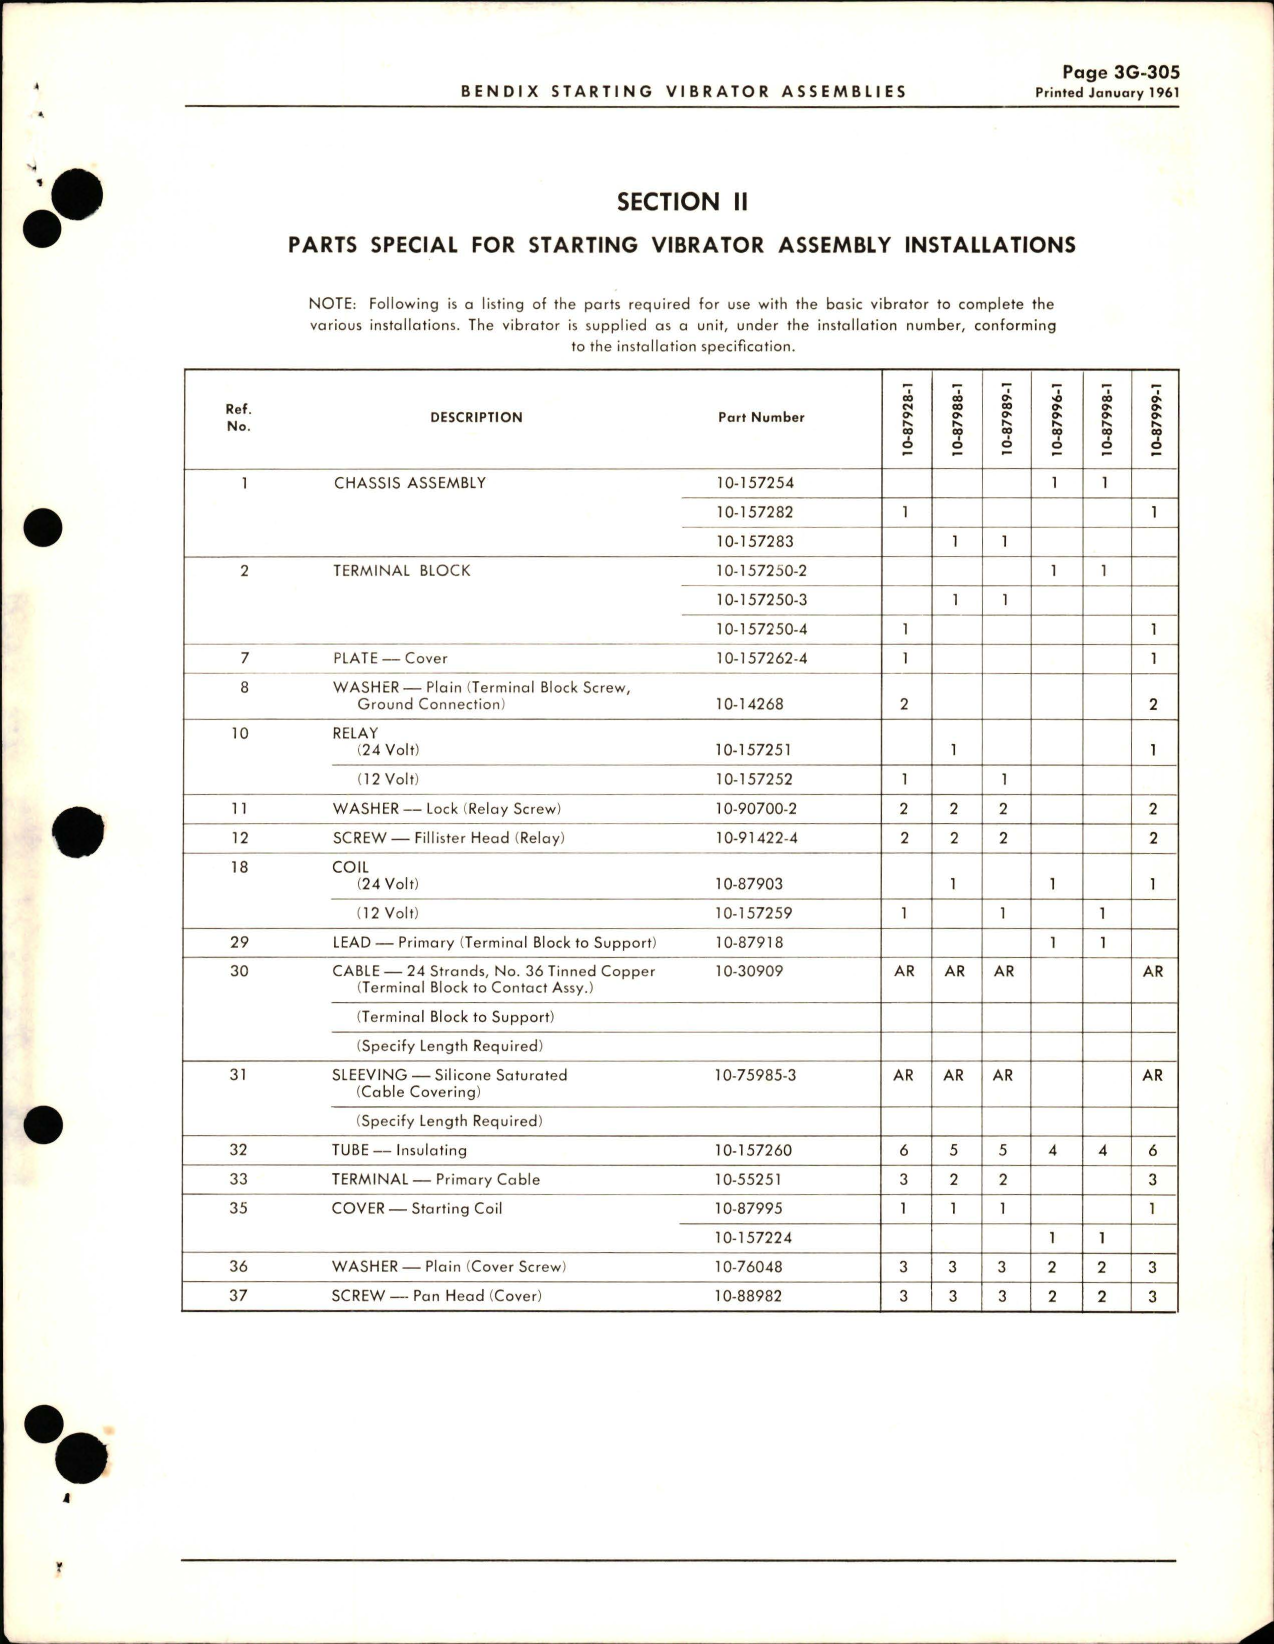 Sample page 5 from AirCorps Library document: Service Parts List for Starting Vibrator Assembly used with S-200, S-400, S-500, and S-600 Series Magnetos